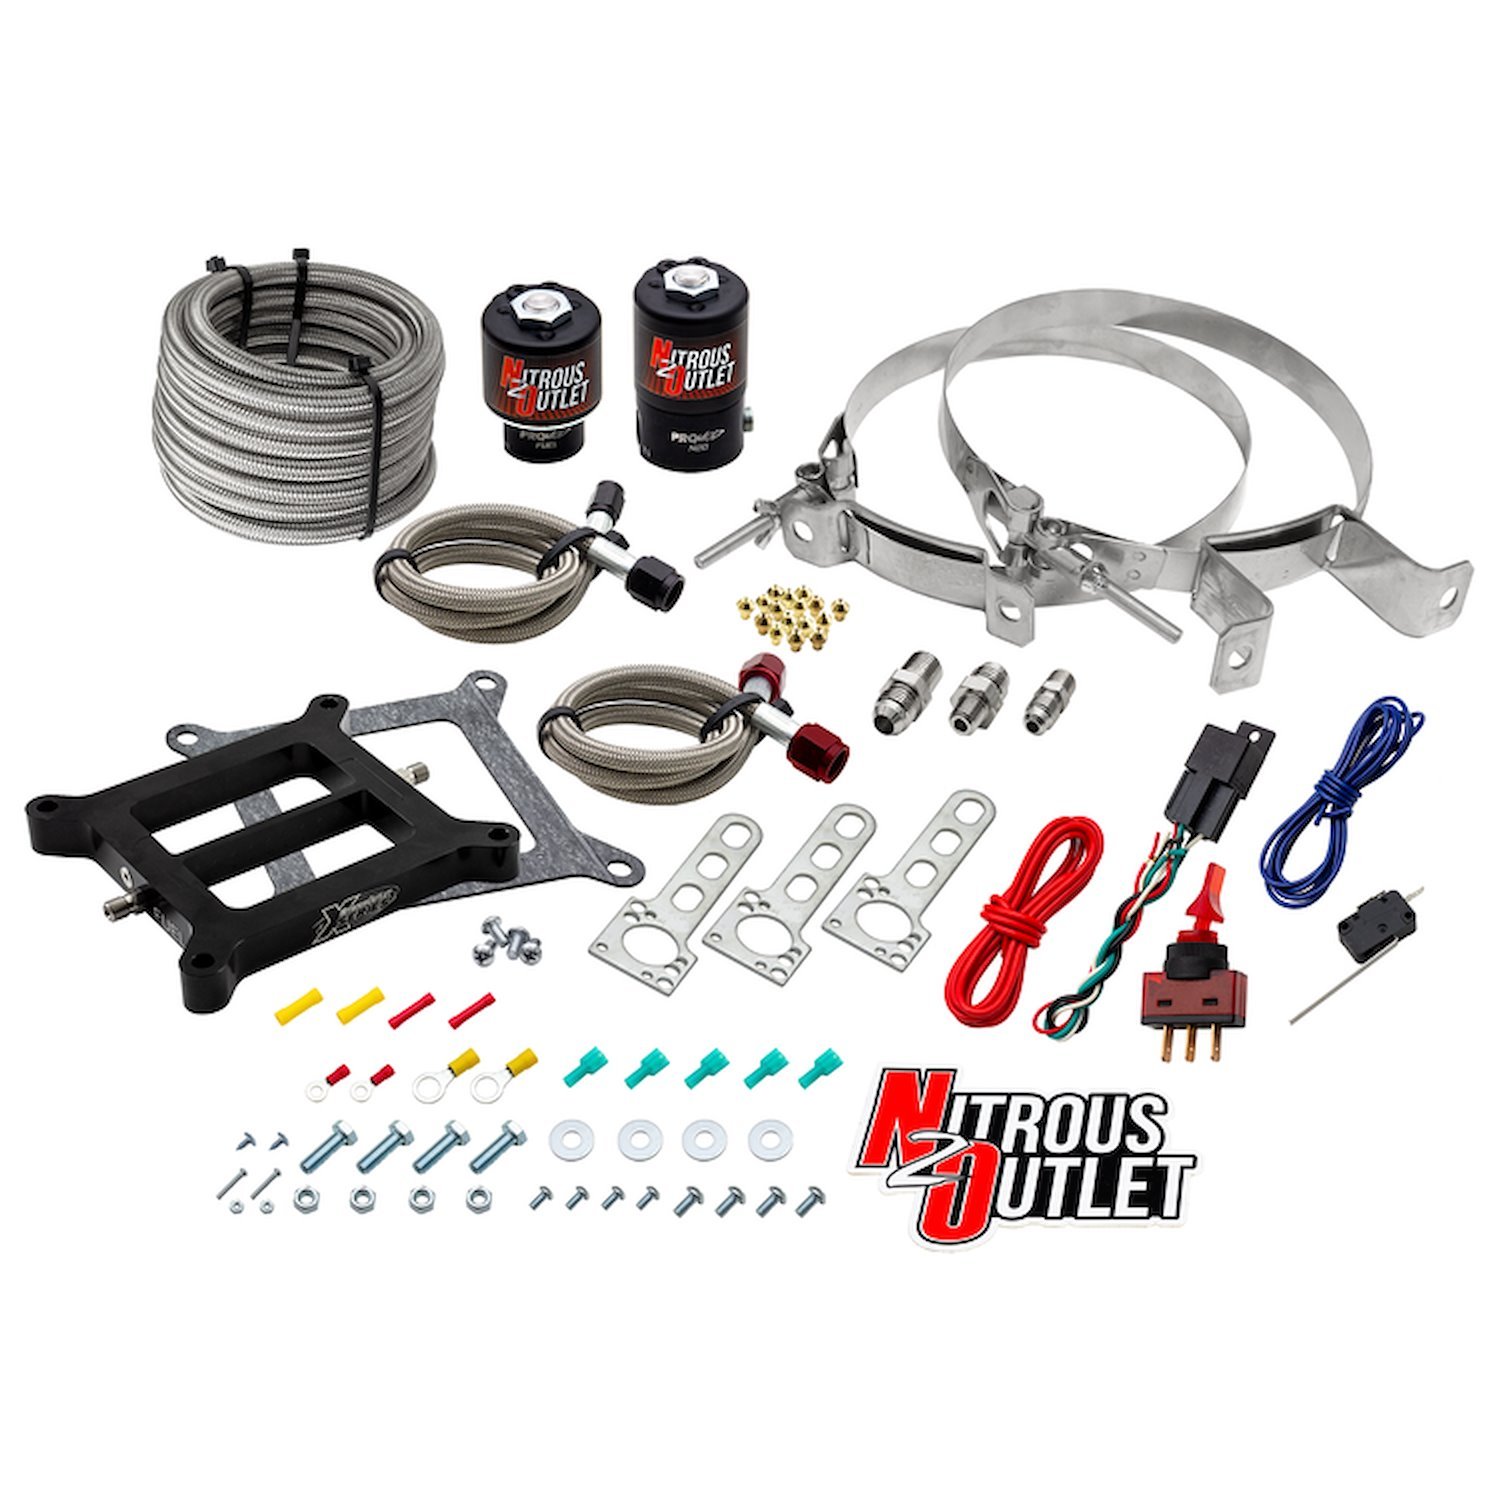 00-10070-00 Weekend Warrior 4150 Plate System, Gas/E85, 5-55psi, 100-350 HP, No Bottle